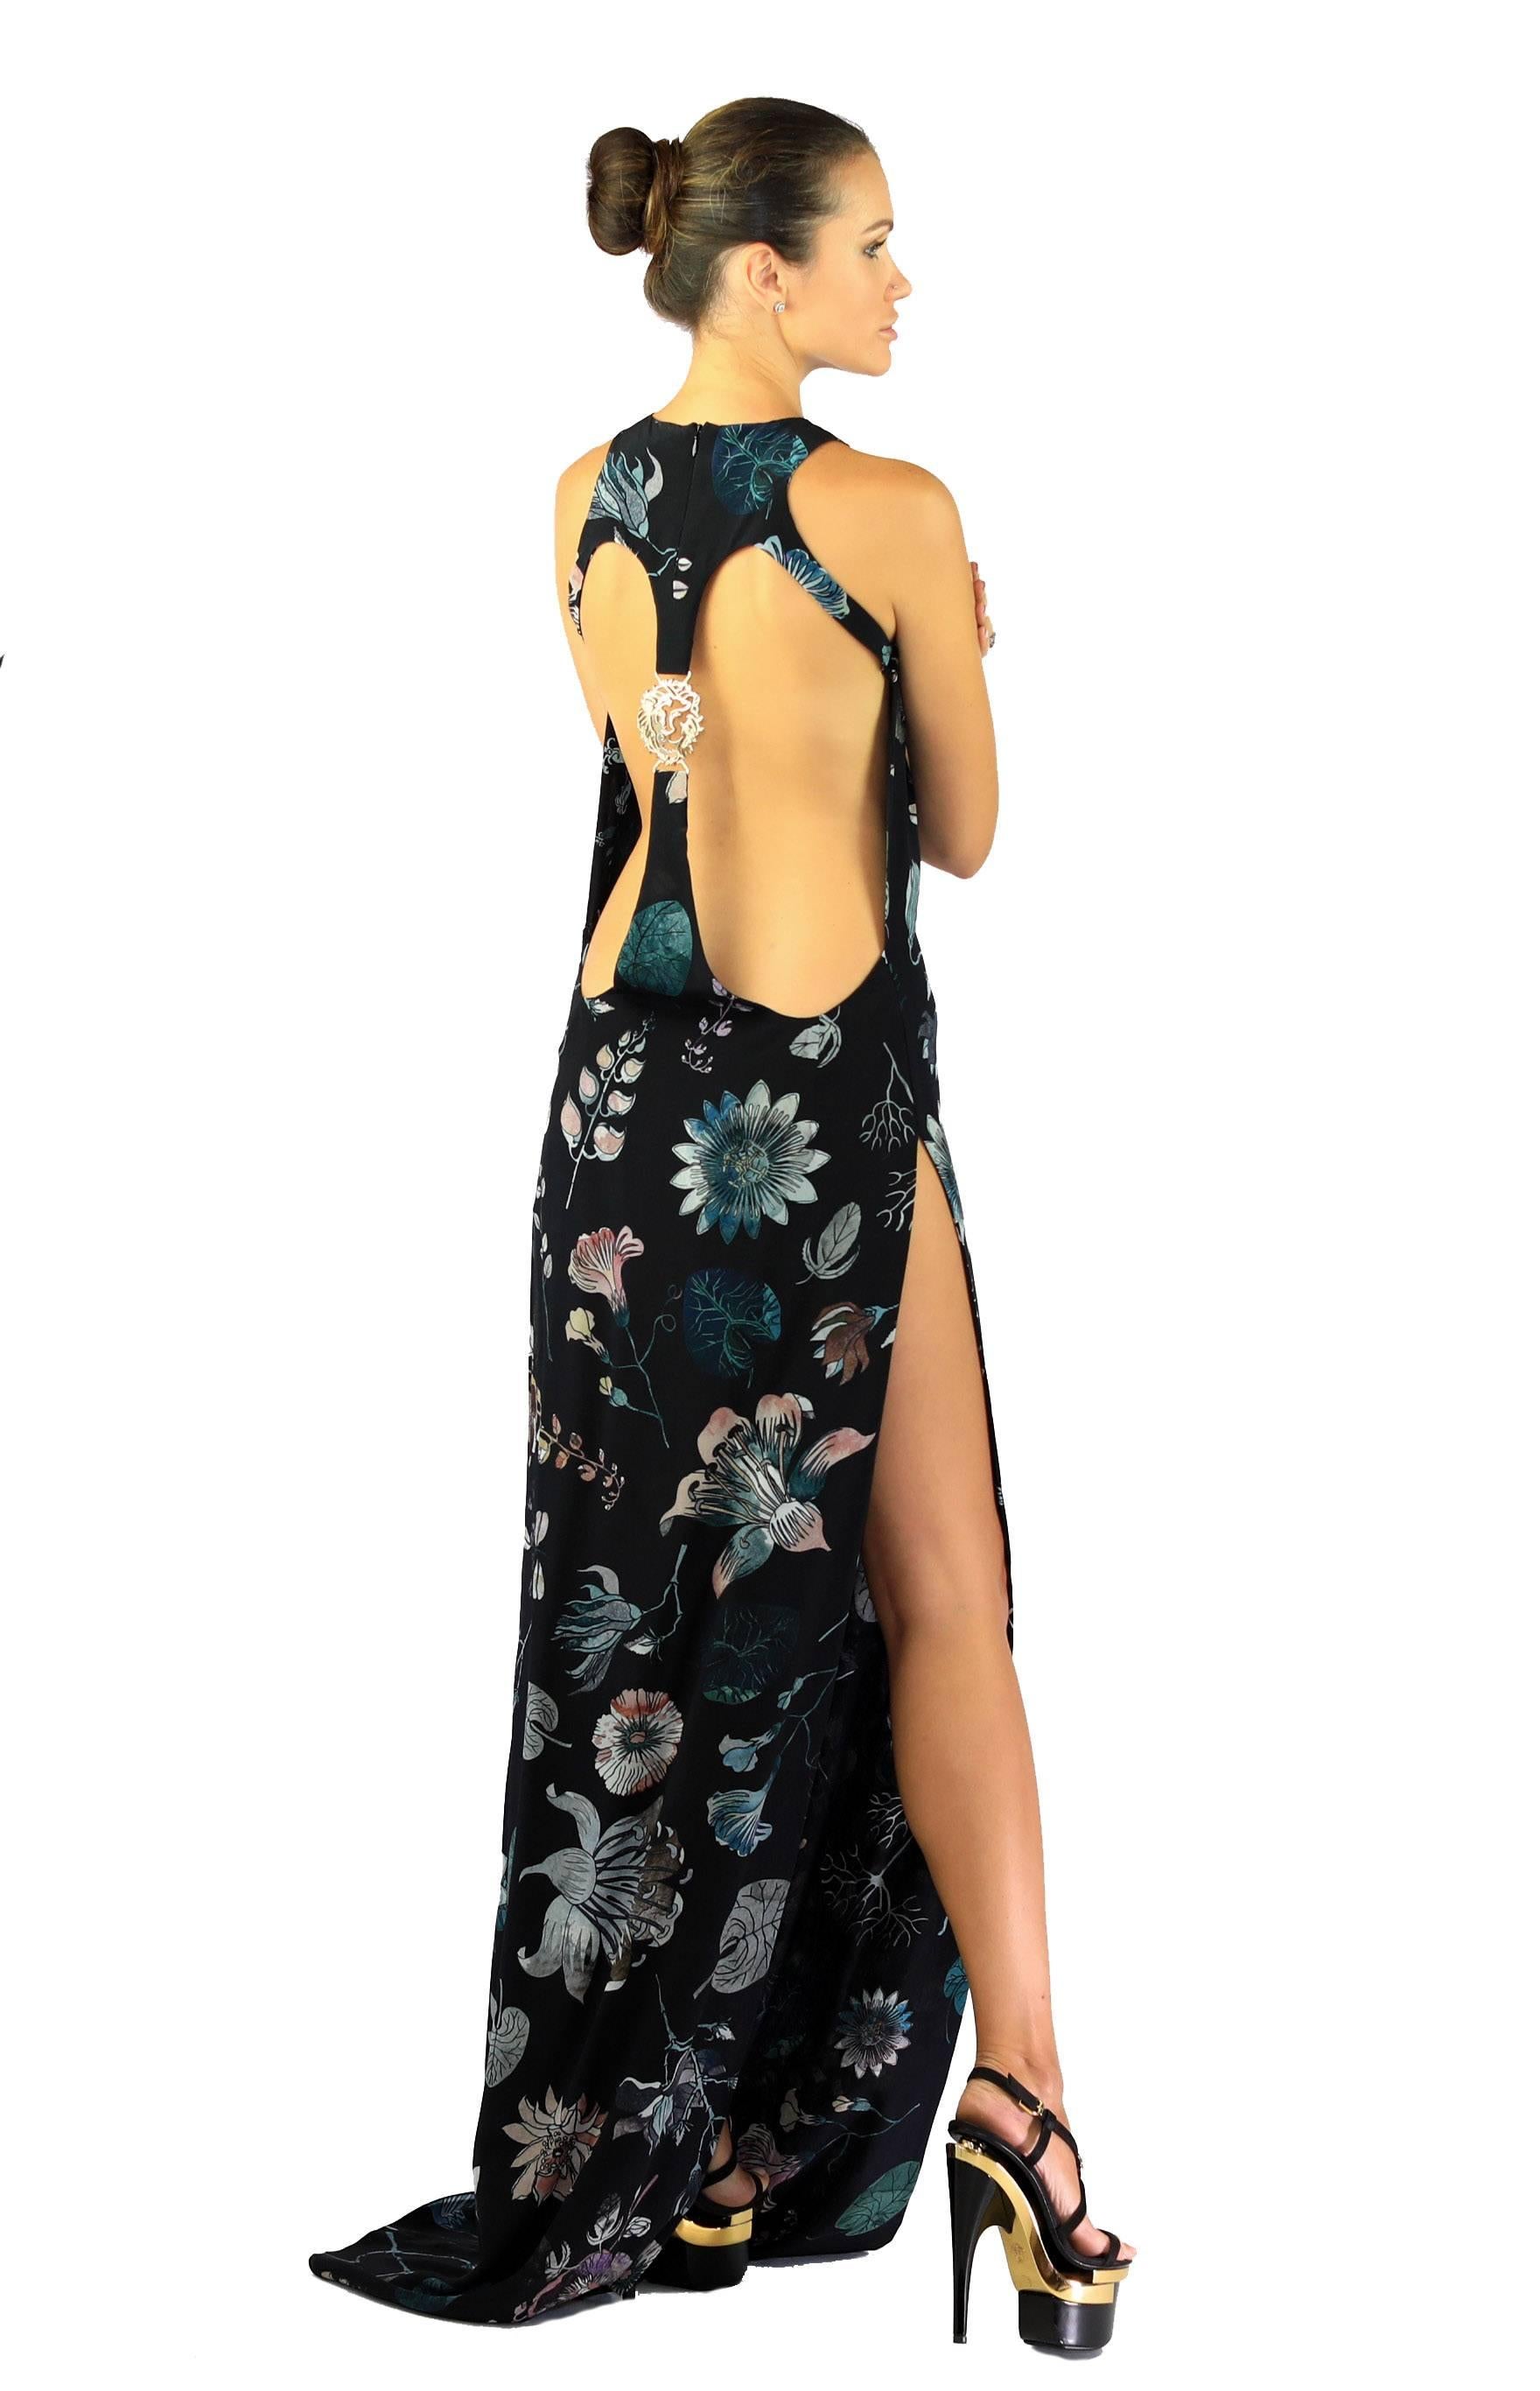 VERSACE VERSUS
+ Anthony Vaccarello 

Long 100%  silk dress


This lightweight floral print silk dress  is accented with a decorative lion medallion on the back. Lining 100% silk

Made in Italy

IT Size: 38 - US 2

Brand New

Tags attached.